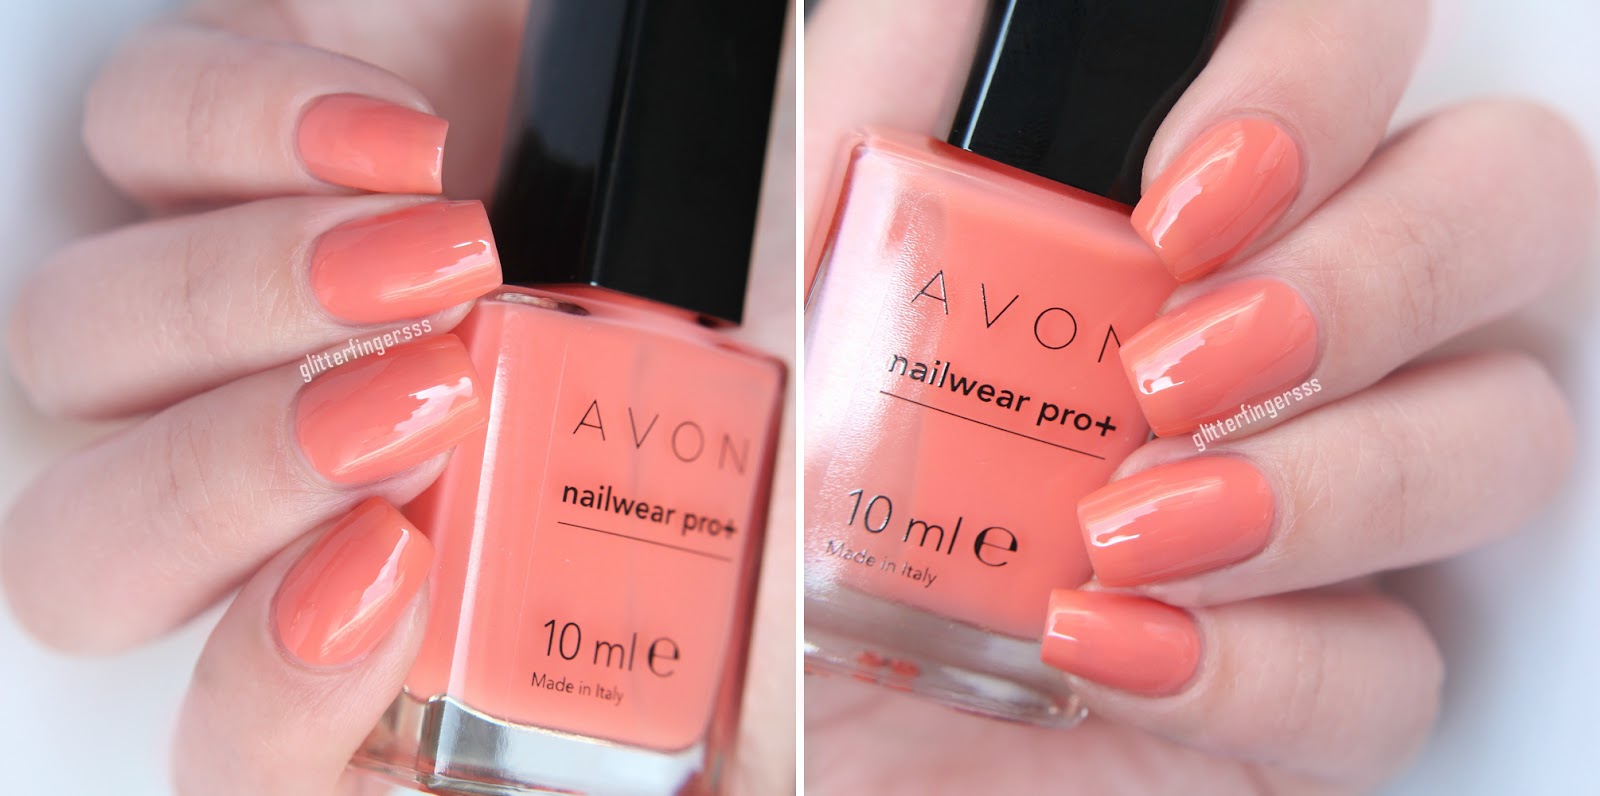 Avon Nail Pro Color Shades - wide 3